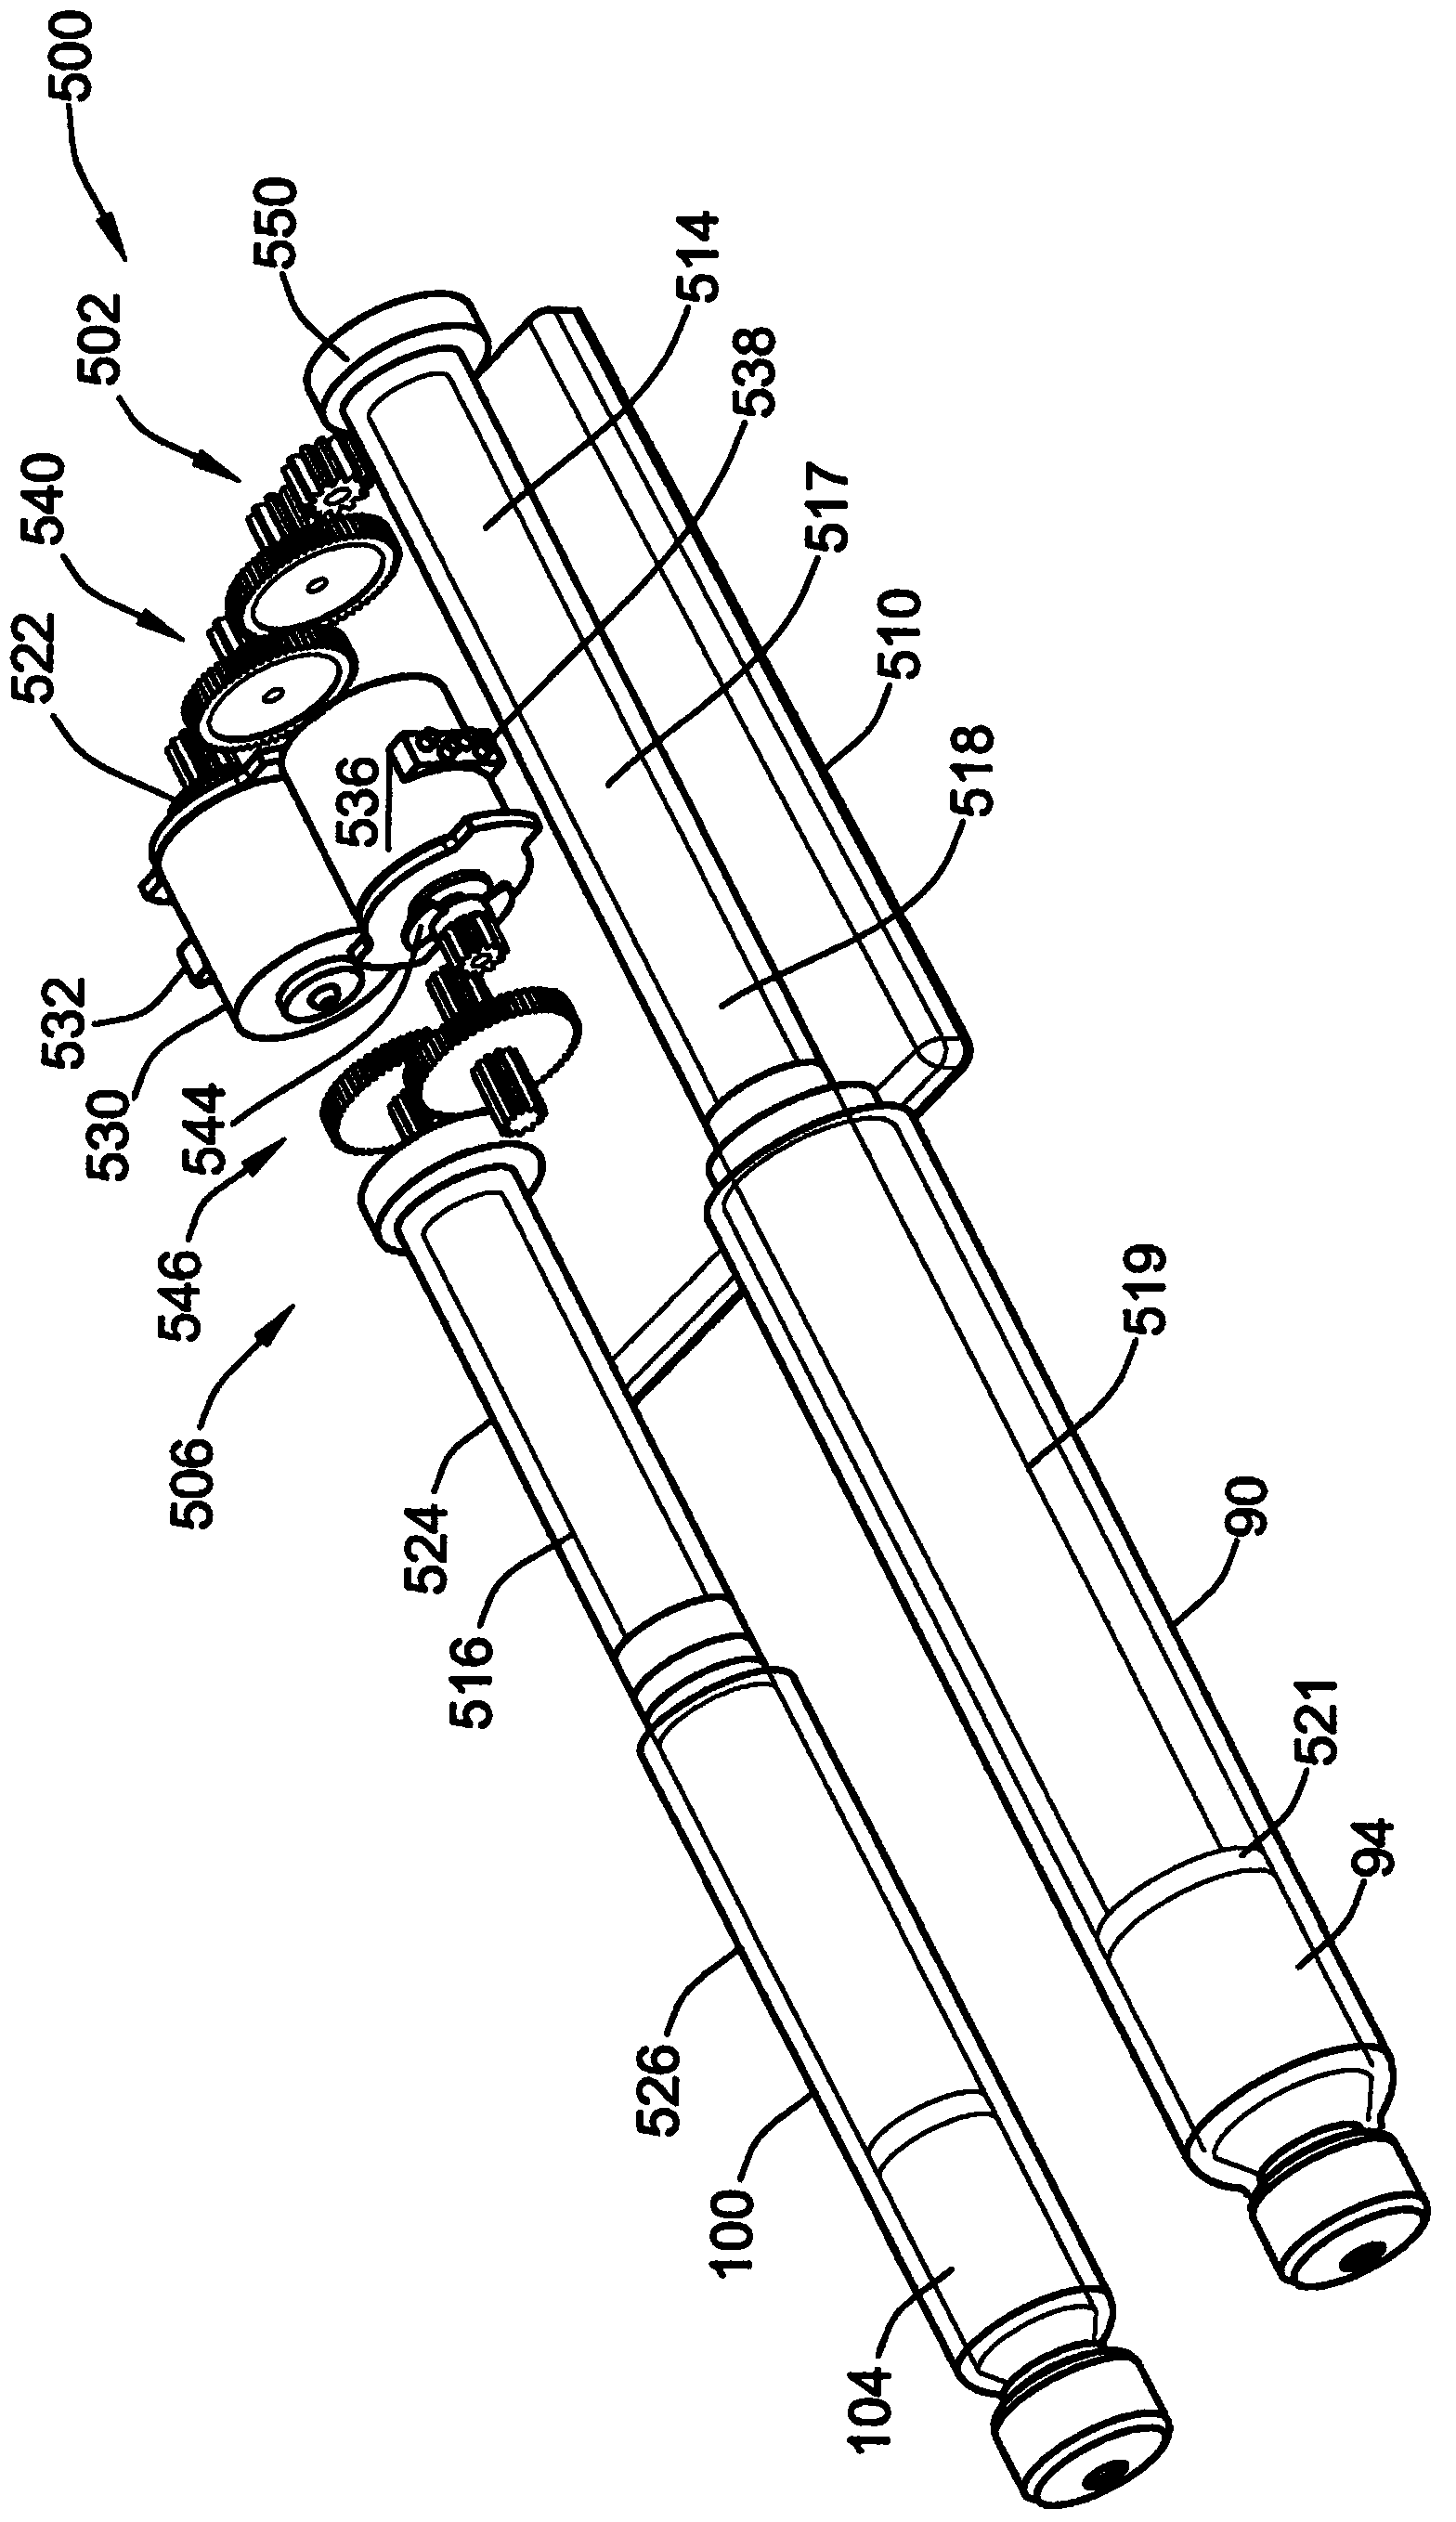 Medical device for delivering at least one fluid from medical device